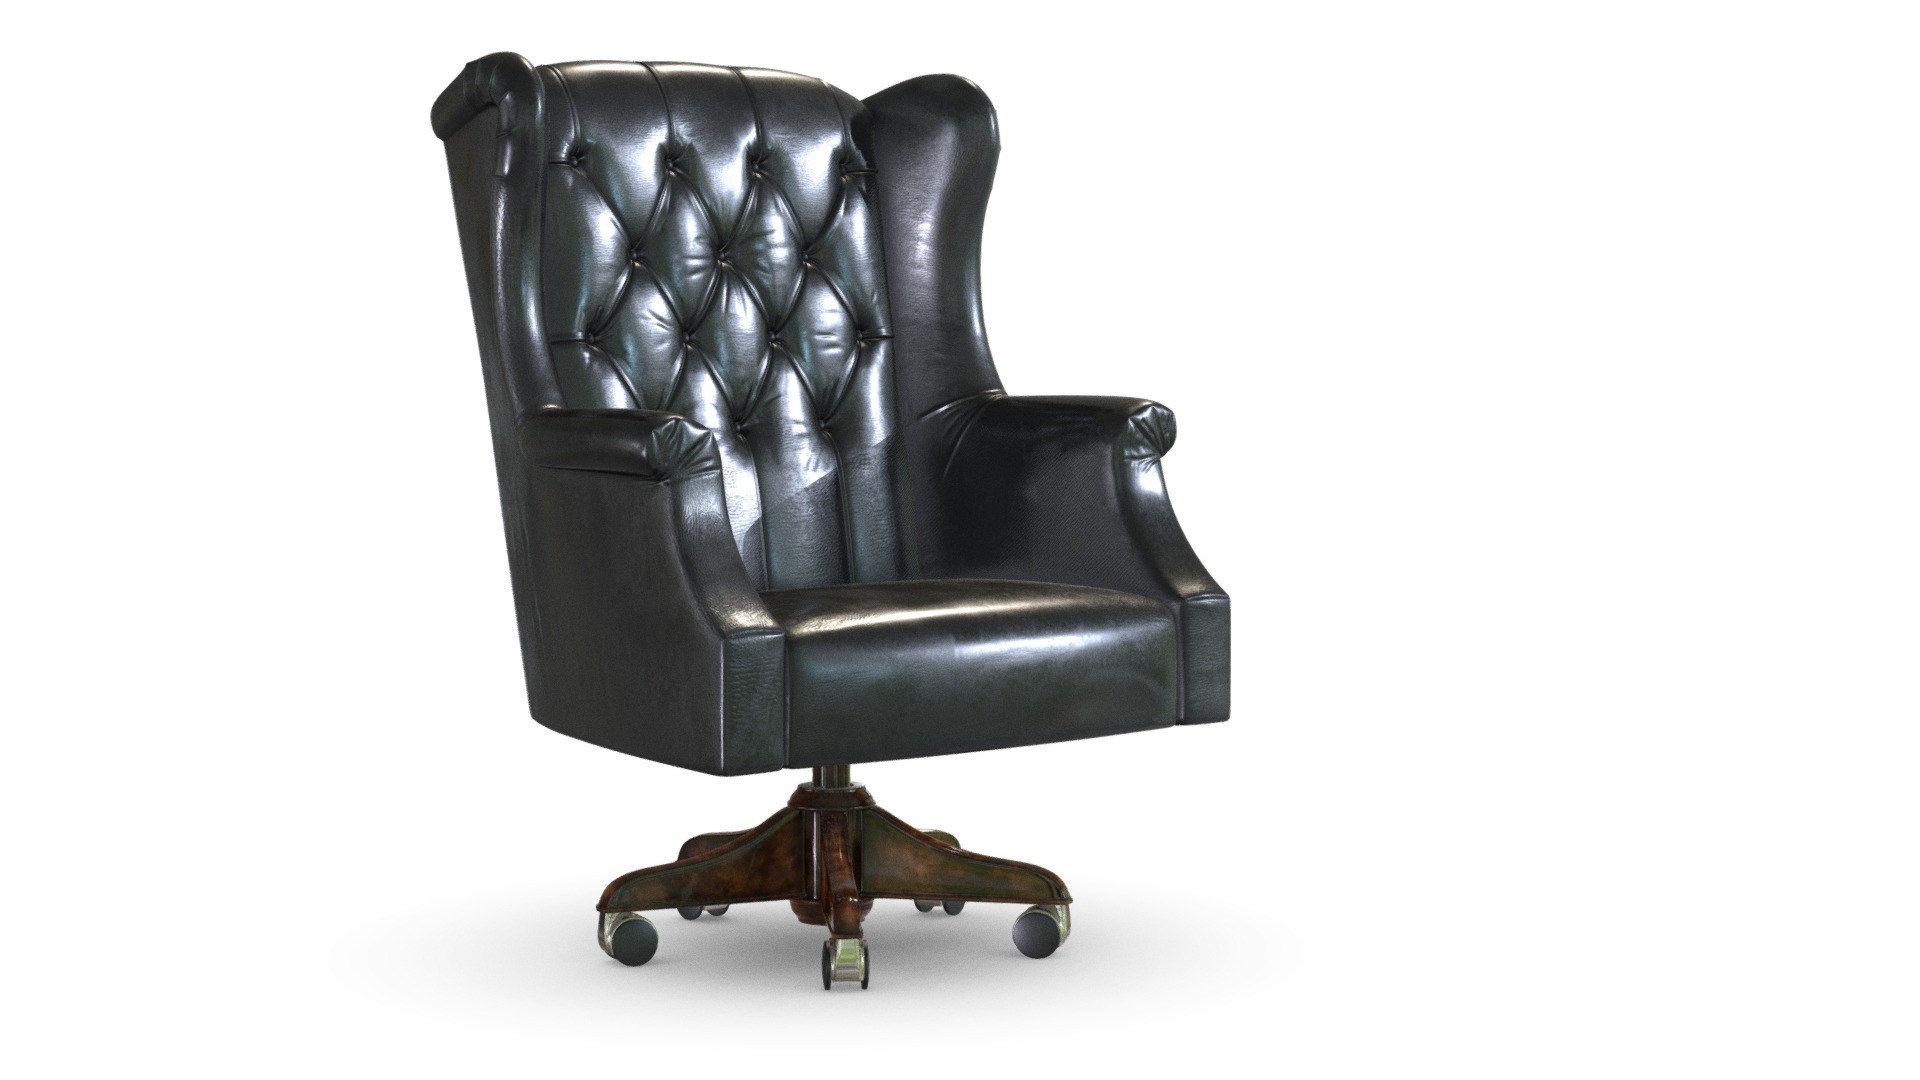 3D model Presidential Office Chair - This is a 3D model of the Presidential Office Chair. The 3D model is about a black leather chair.